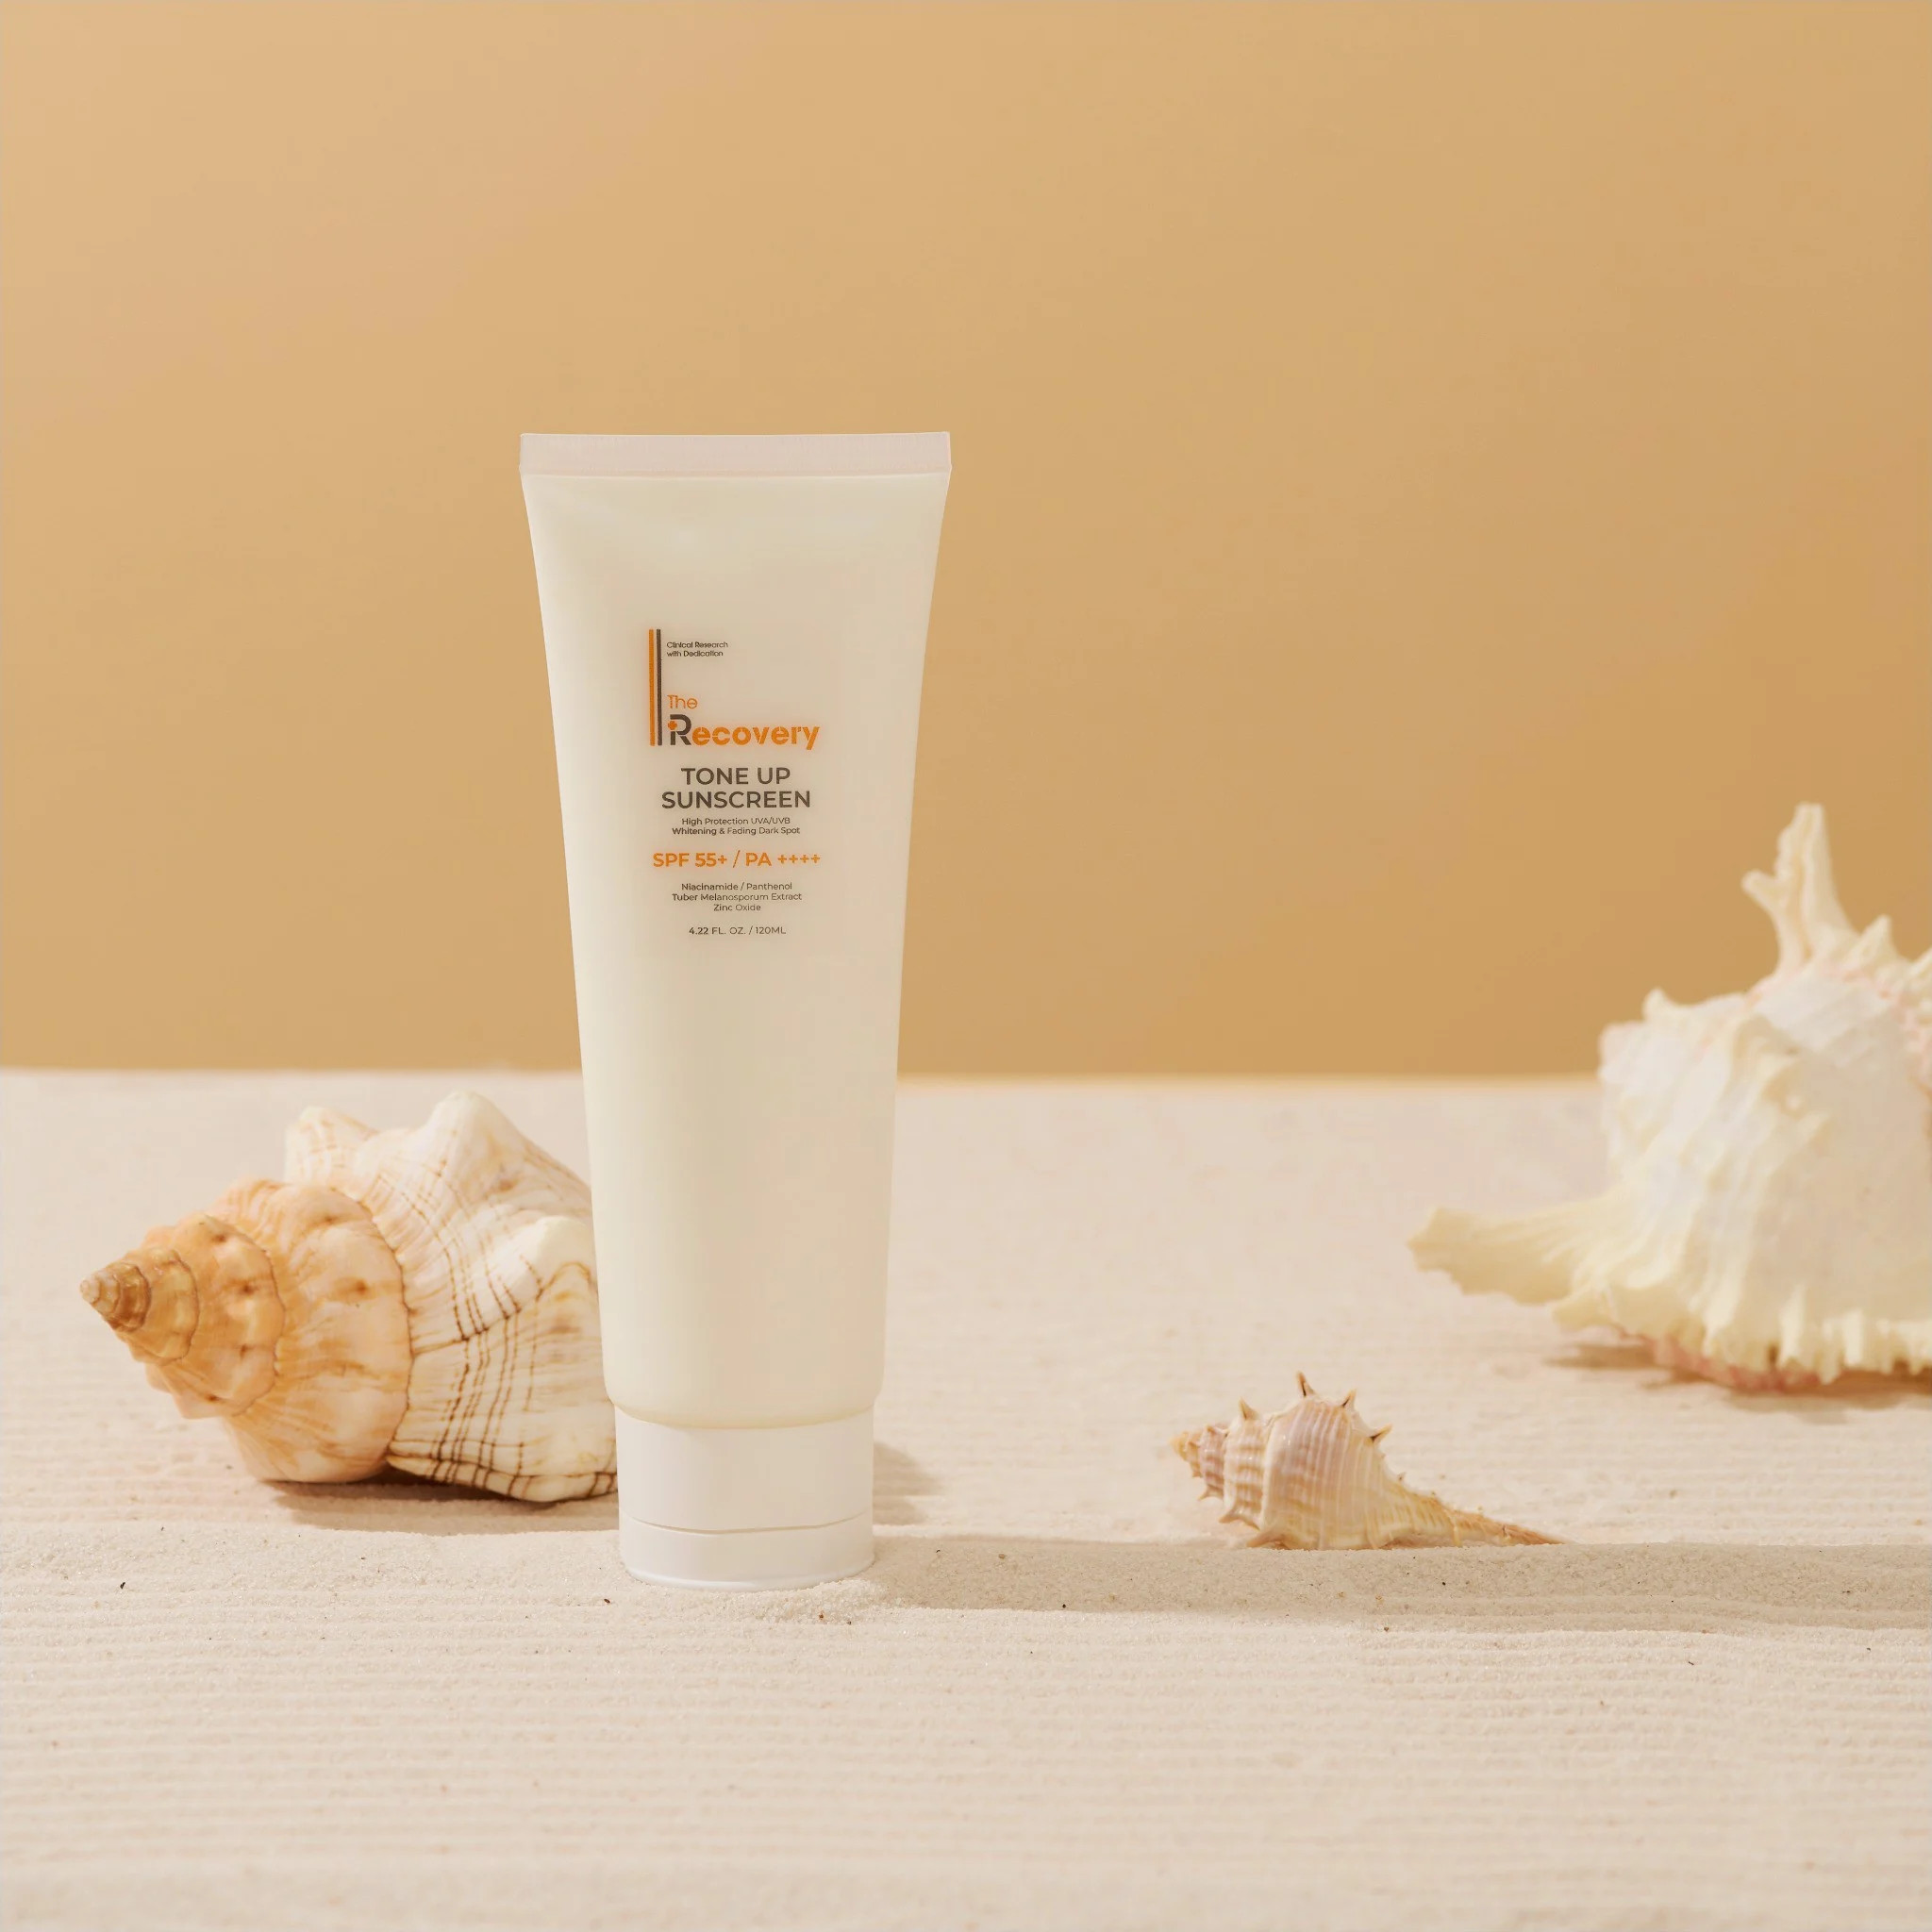 The Recovery Tone Up Sunscreen SPF 55+